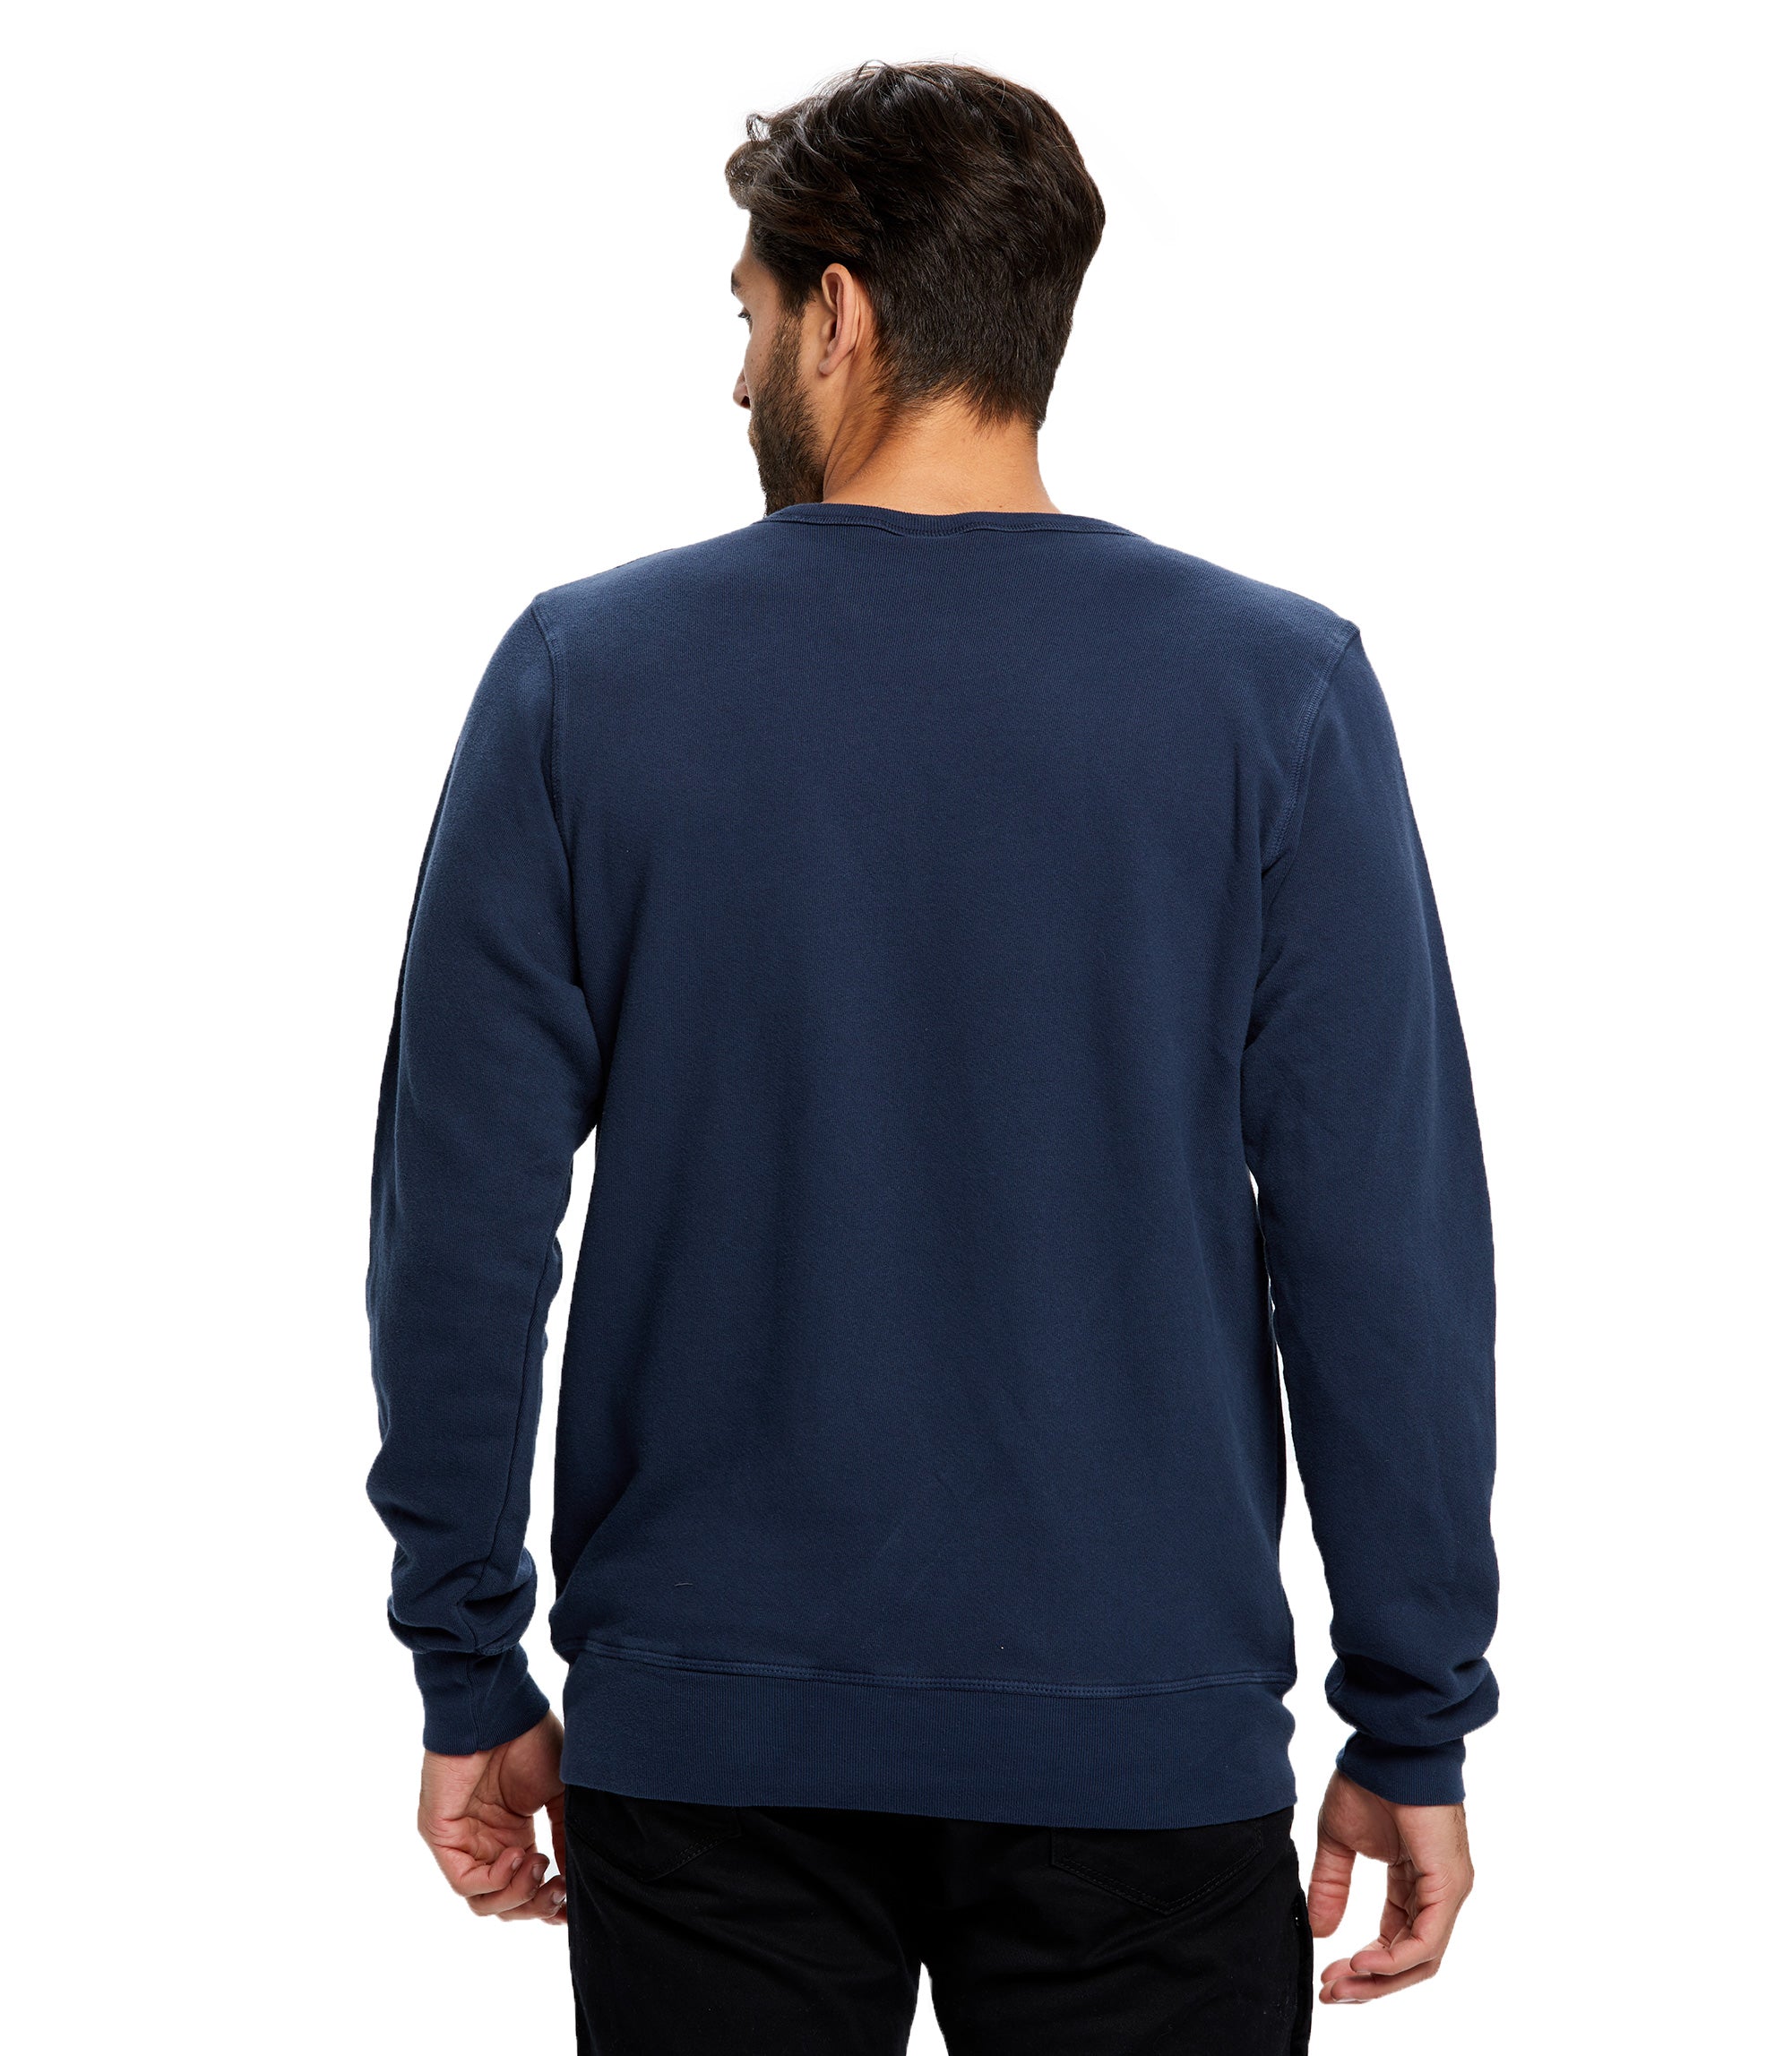 Unisex Long Sleeve Pullover Crew - Garment Dyed